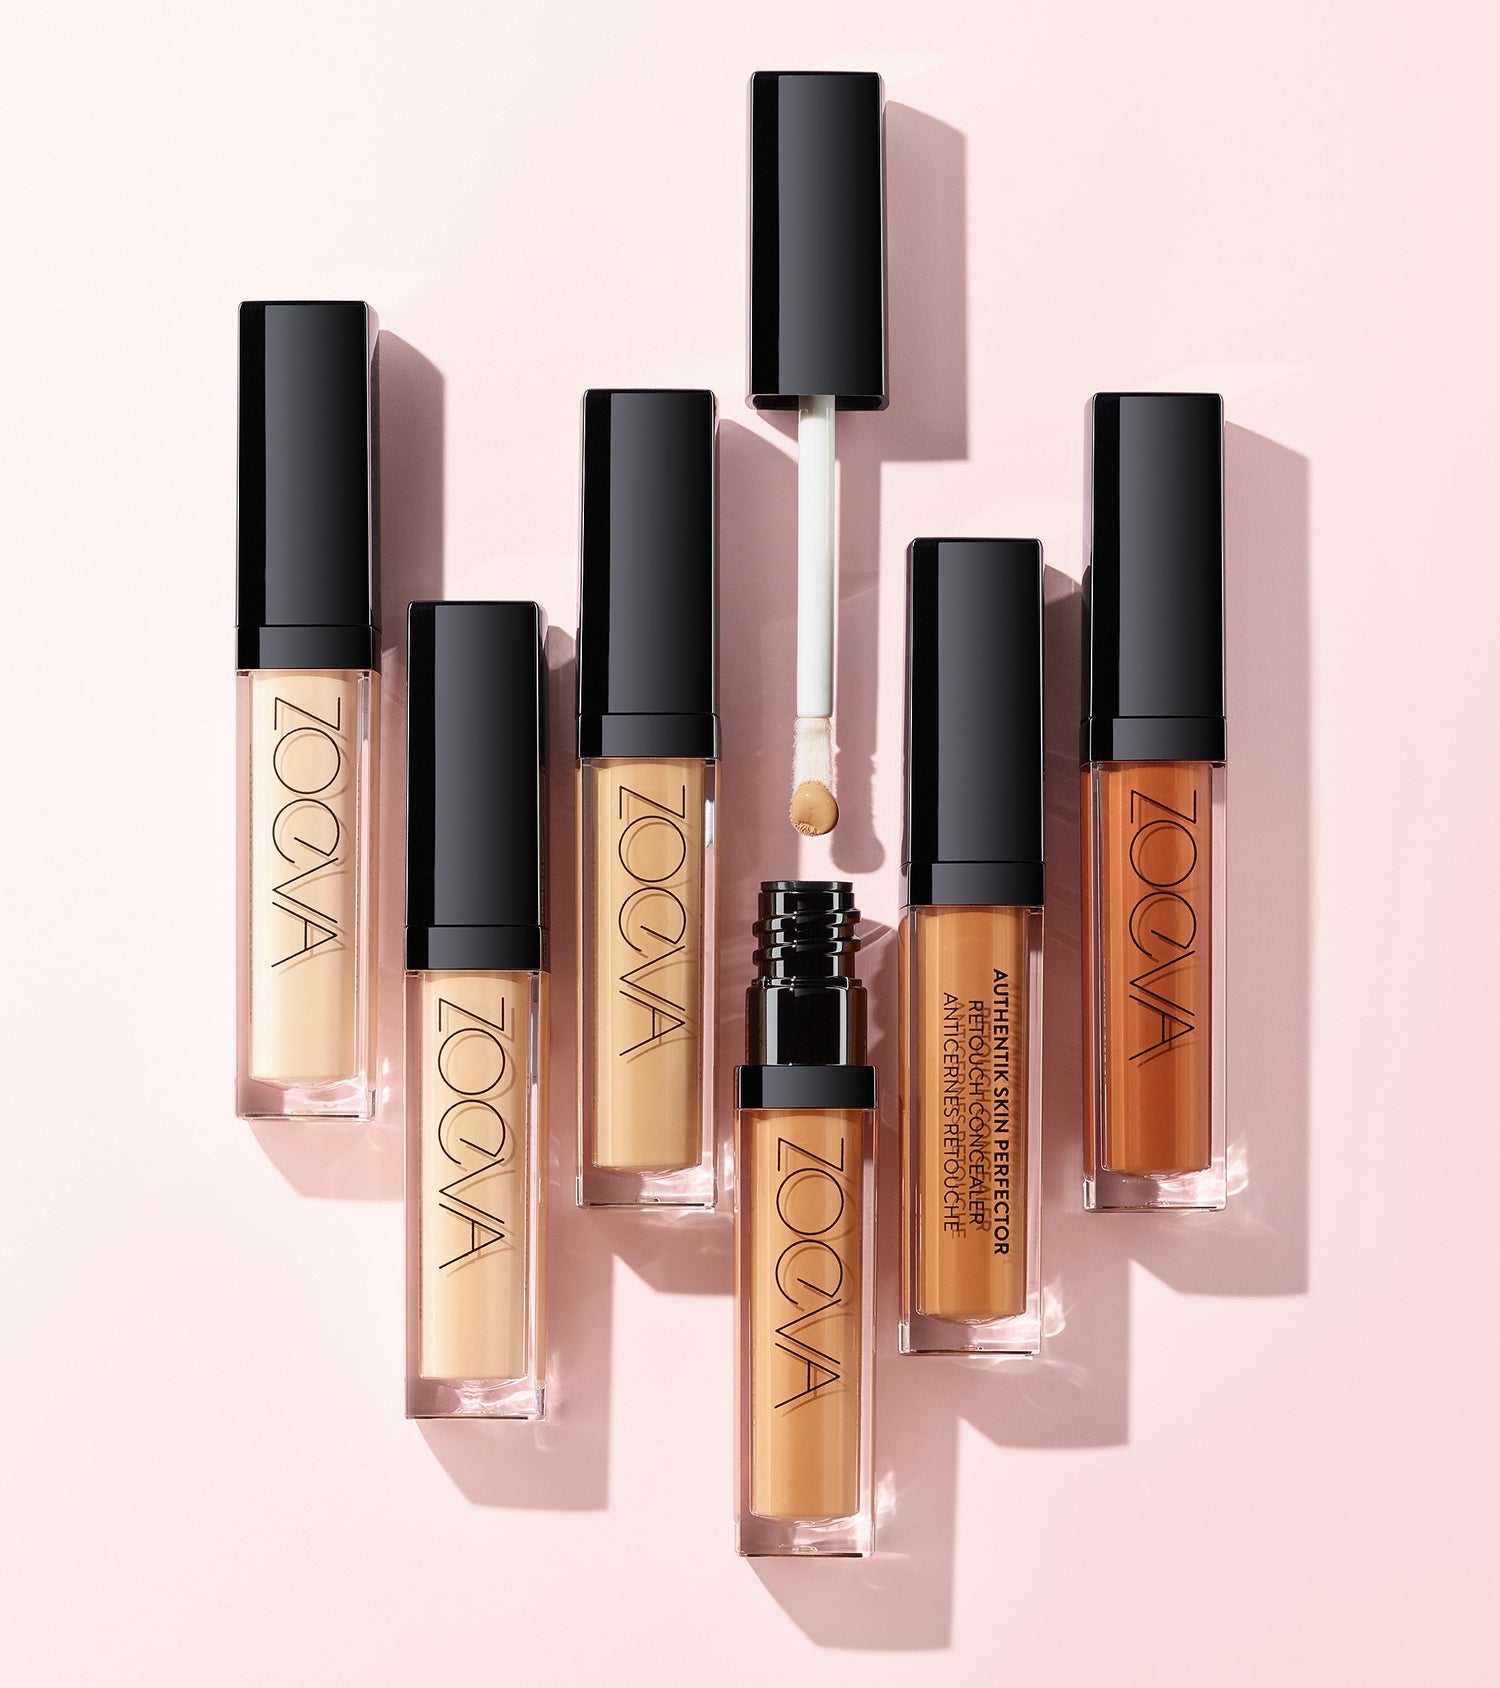 AUTHENTIK SKIN PERFECTOR CONCEALER (070 CREDITABLE) Main Image featured